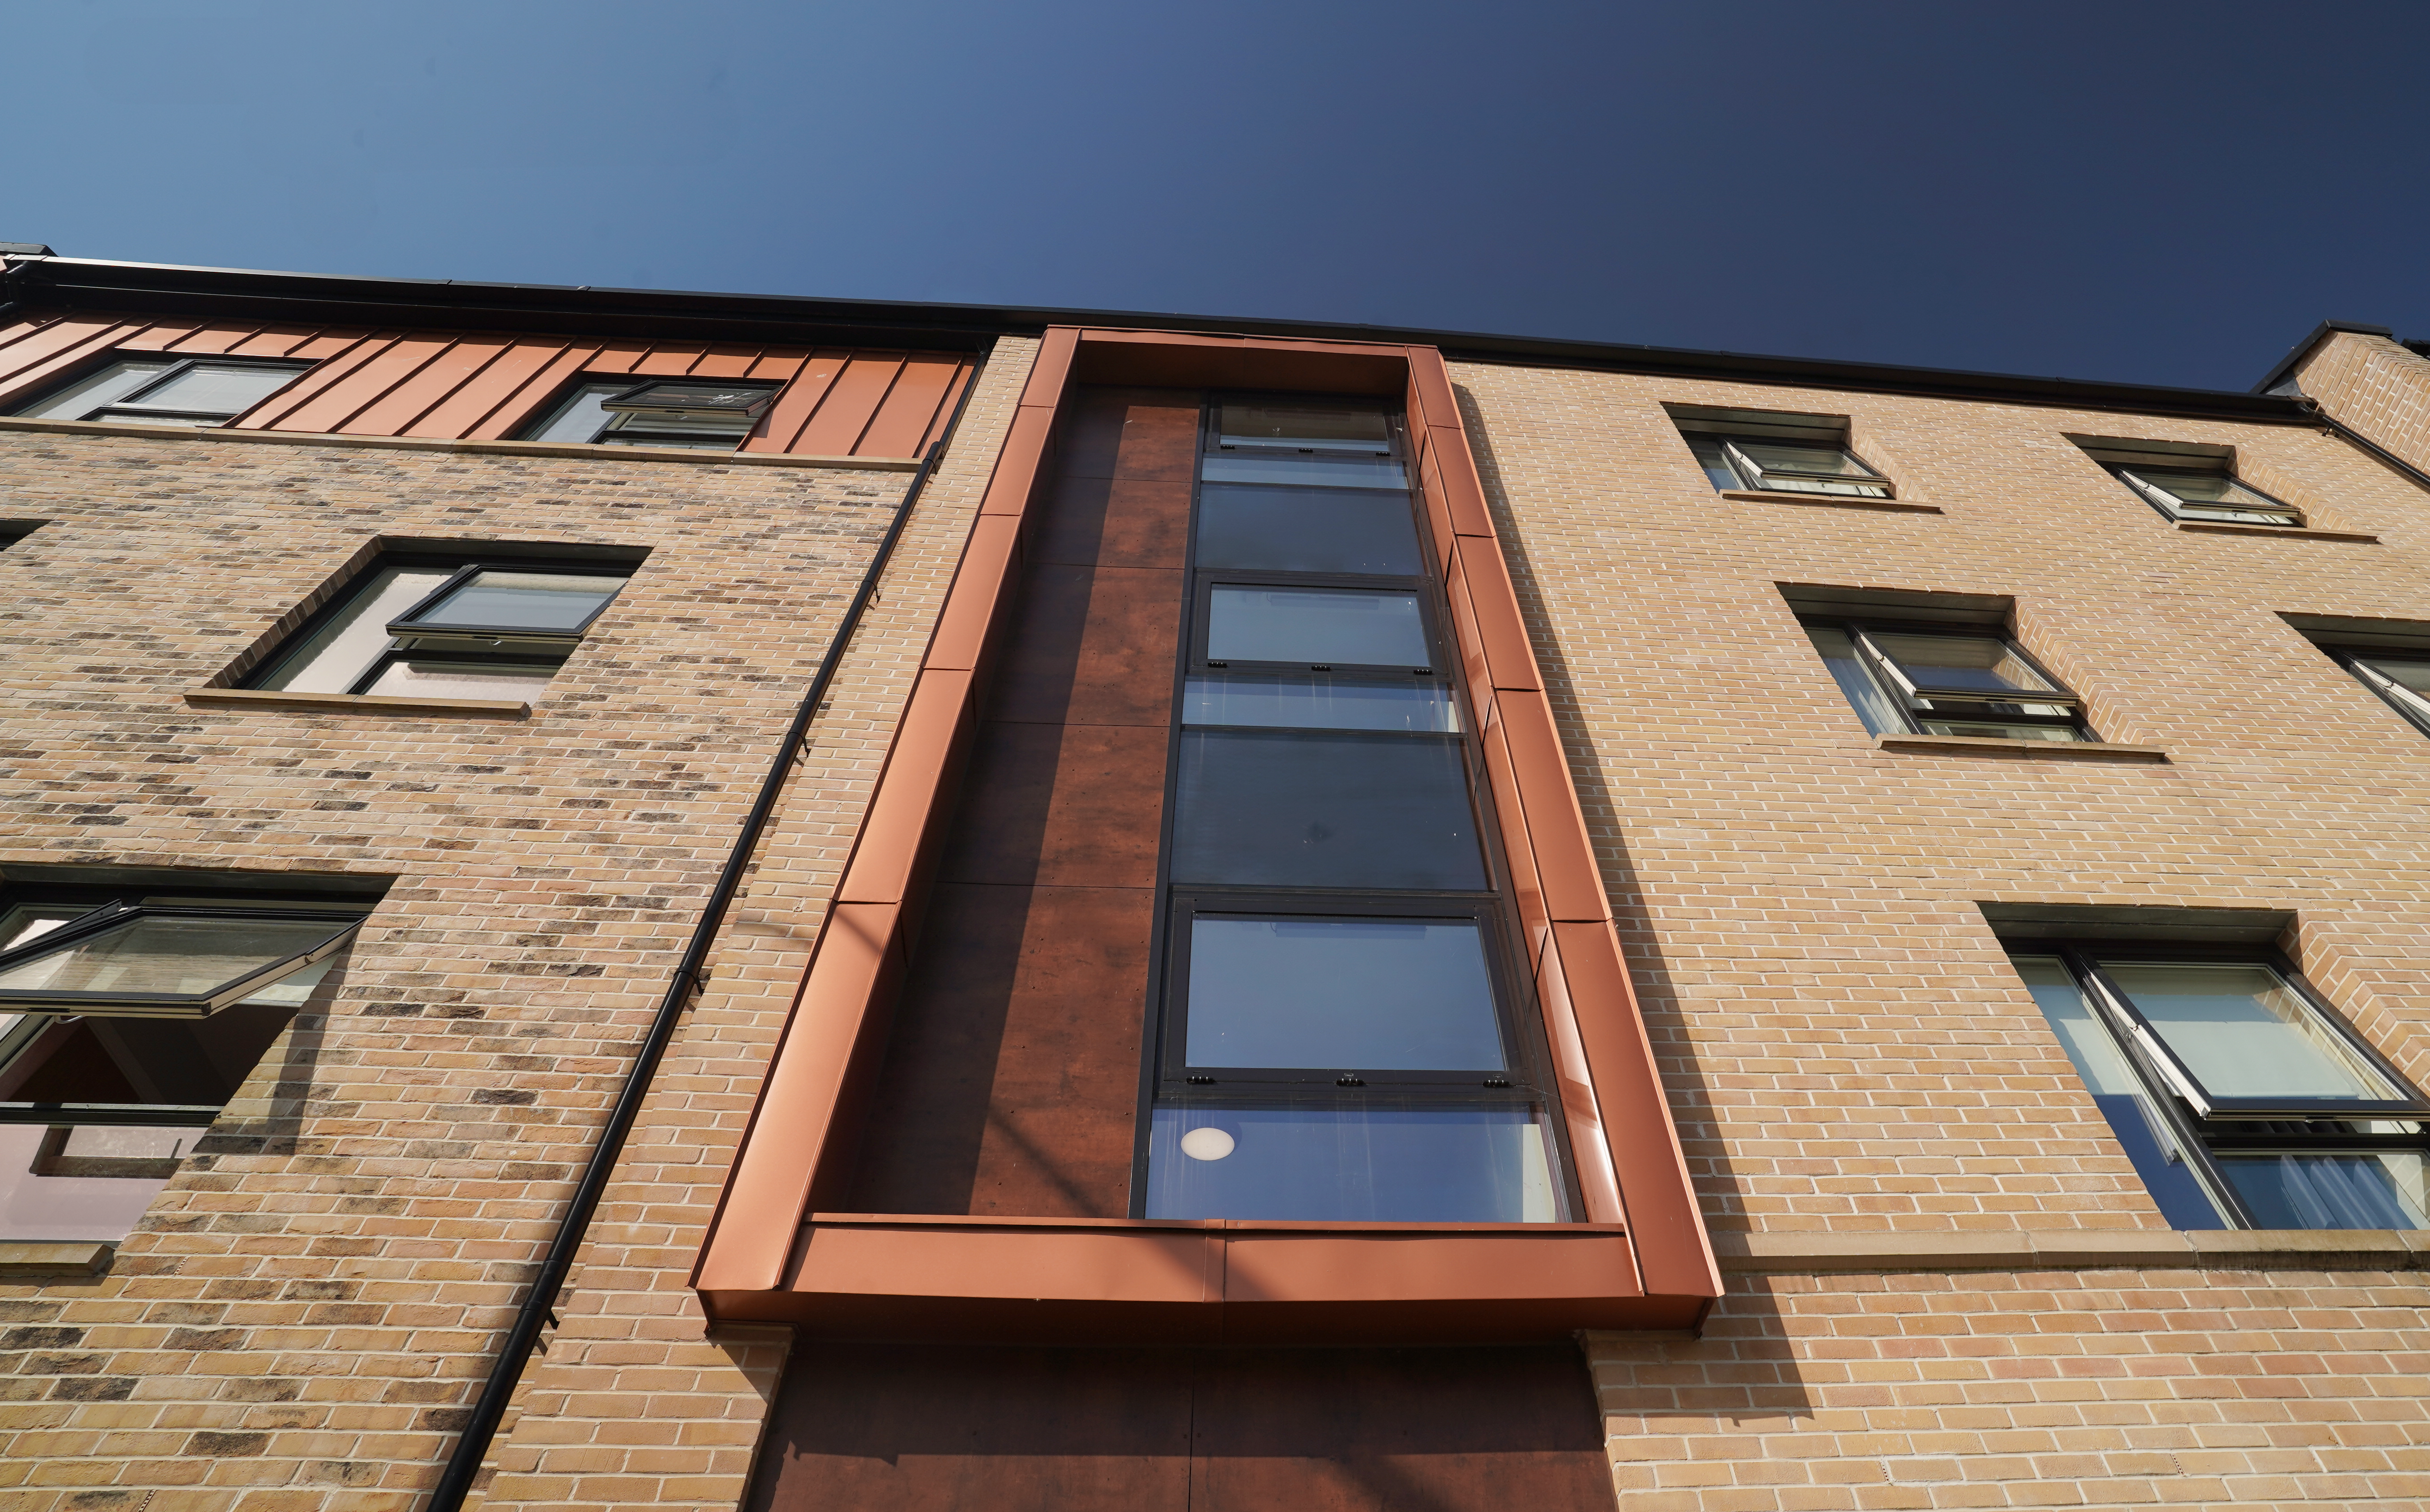 Detailed view of the façade of a residential building on Nethan Street in Glasgow, characterised by the cladding with FALZONAL in new copper. The copper-coloured aluminium cladding around the window sections sets modern accents against the classic brick façade and shows the interplay of innovative materials and traditional design. The high-quality aluminium product from PREFA underlines the aesthetics of the building and at the same time ensures its durability and weather resistance.